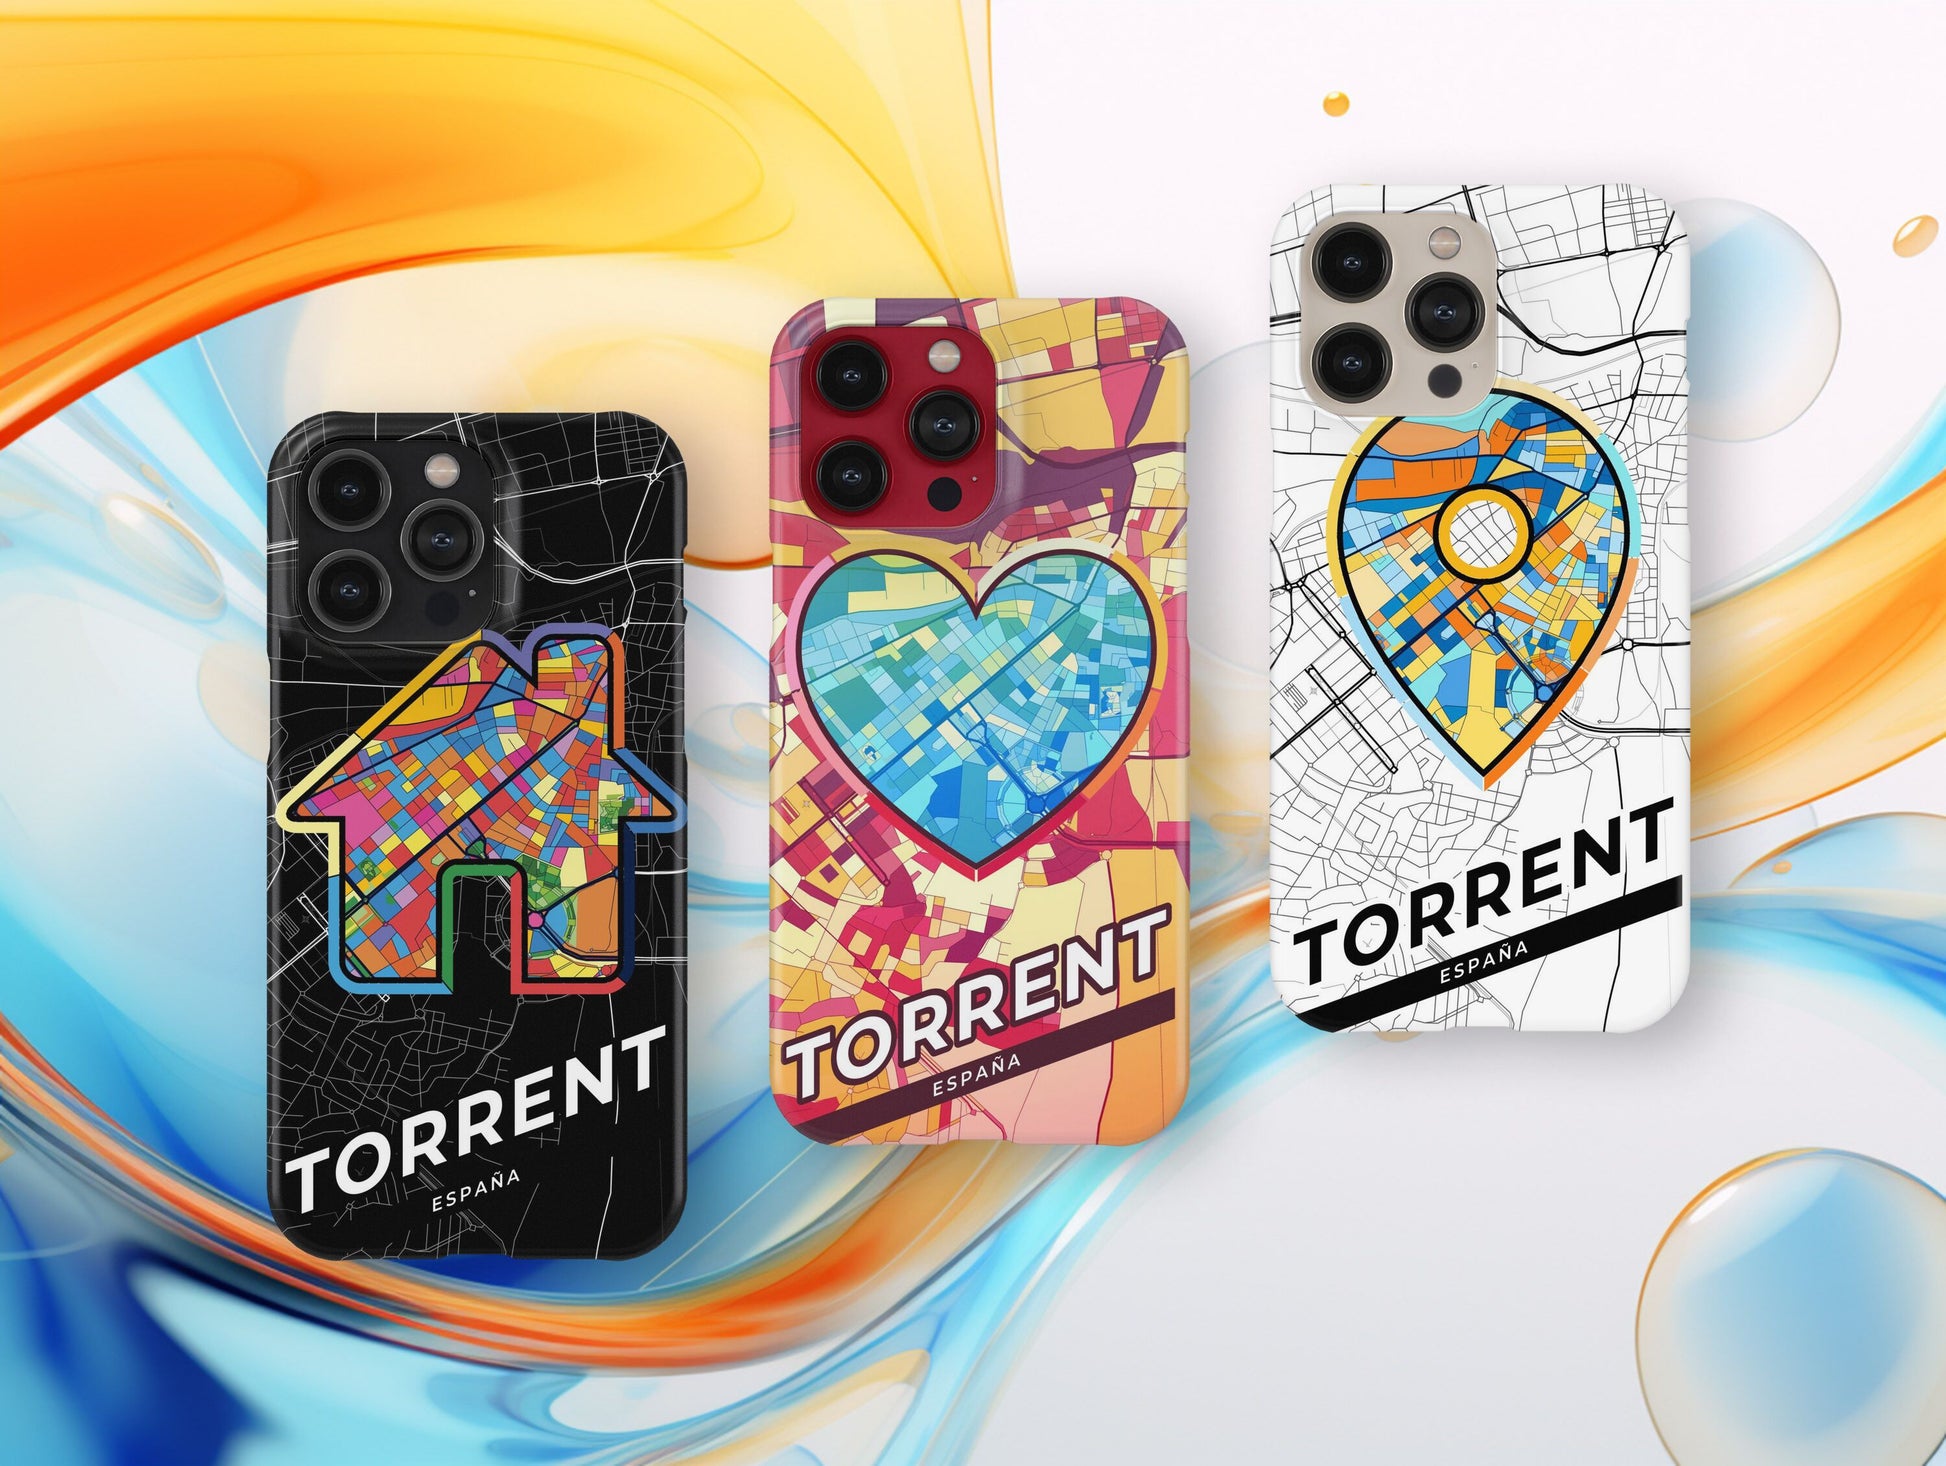 Torrent Spain slim phone case with colorful icon